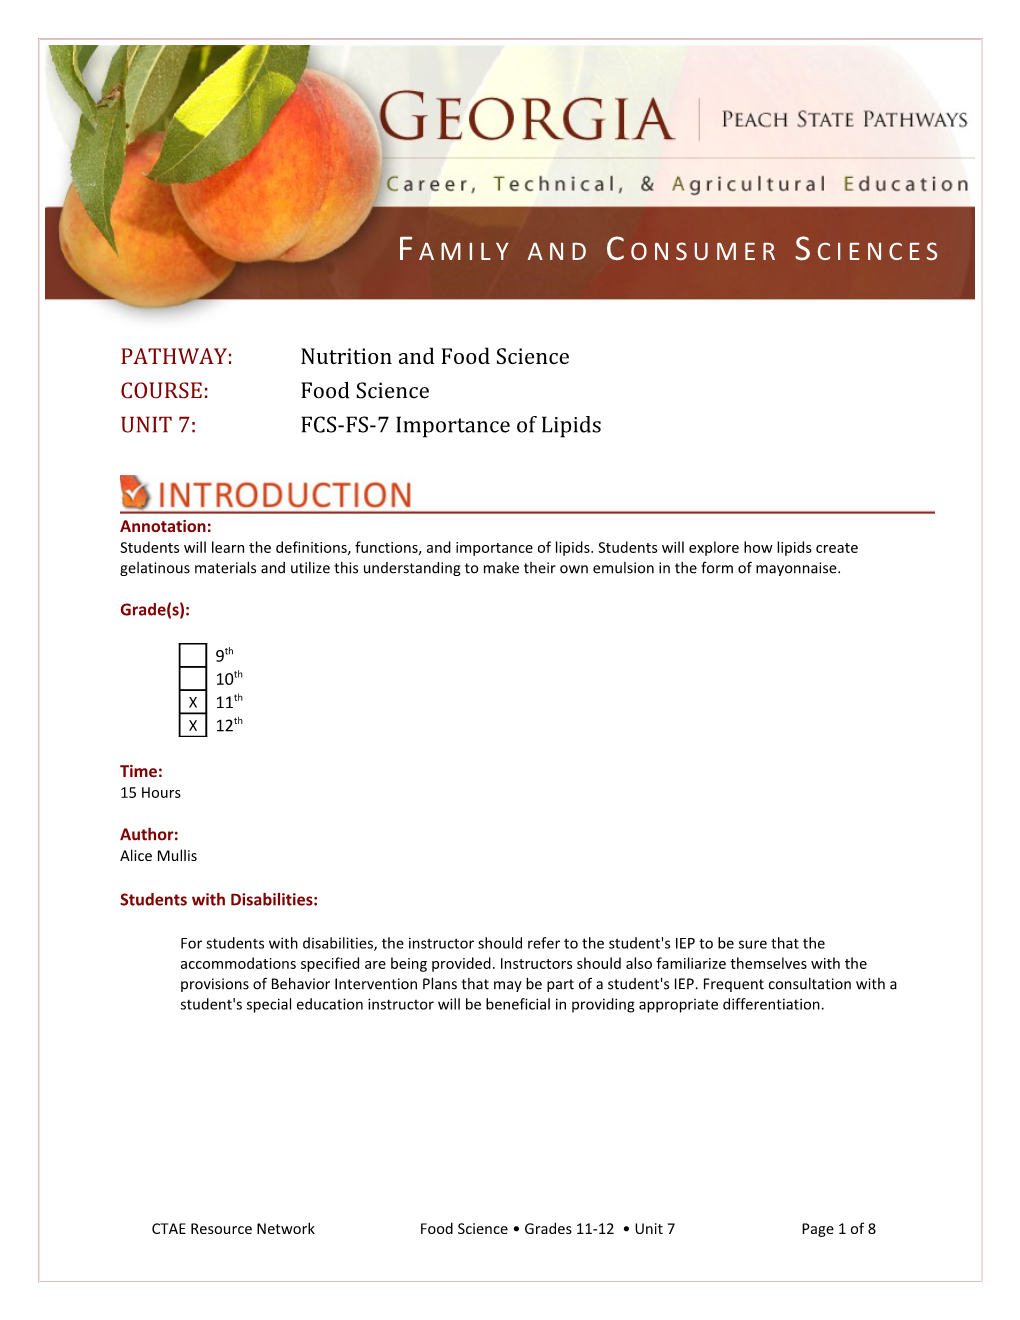 PATHWAY: Nutrition and Food Science